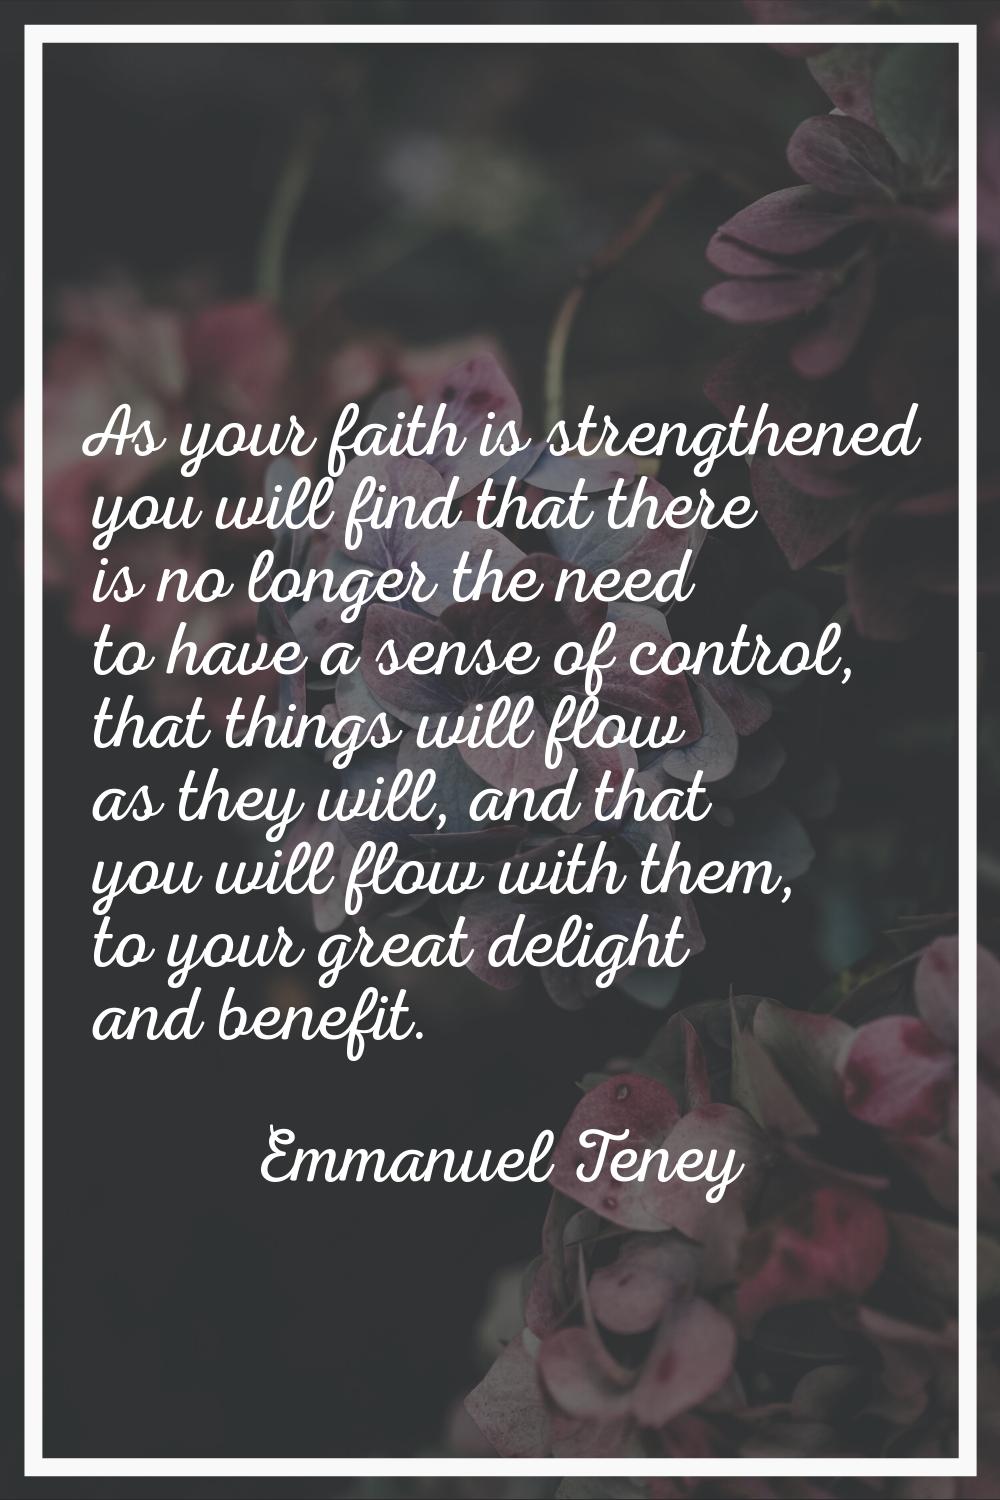 As your faith is strengthened you will find that there is no longer the need to have a sense of con